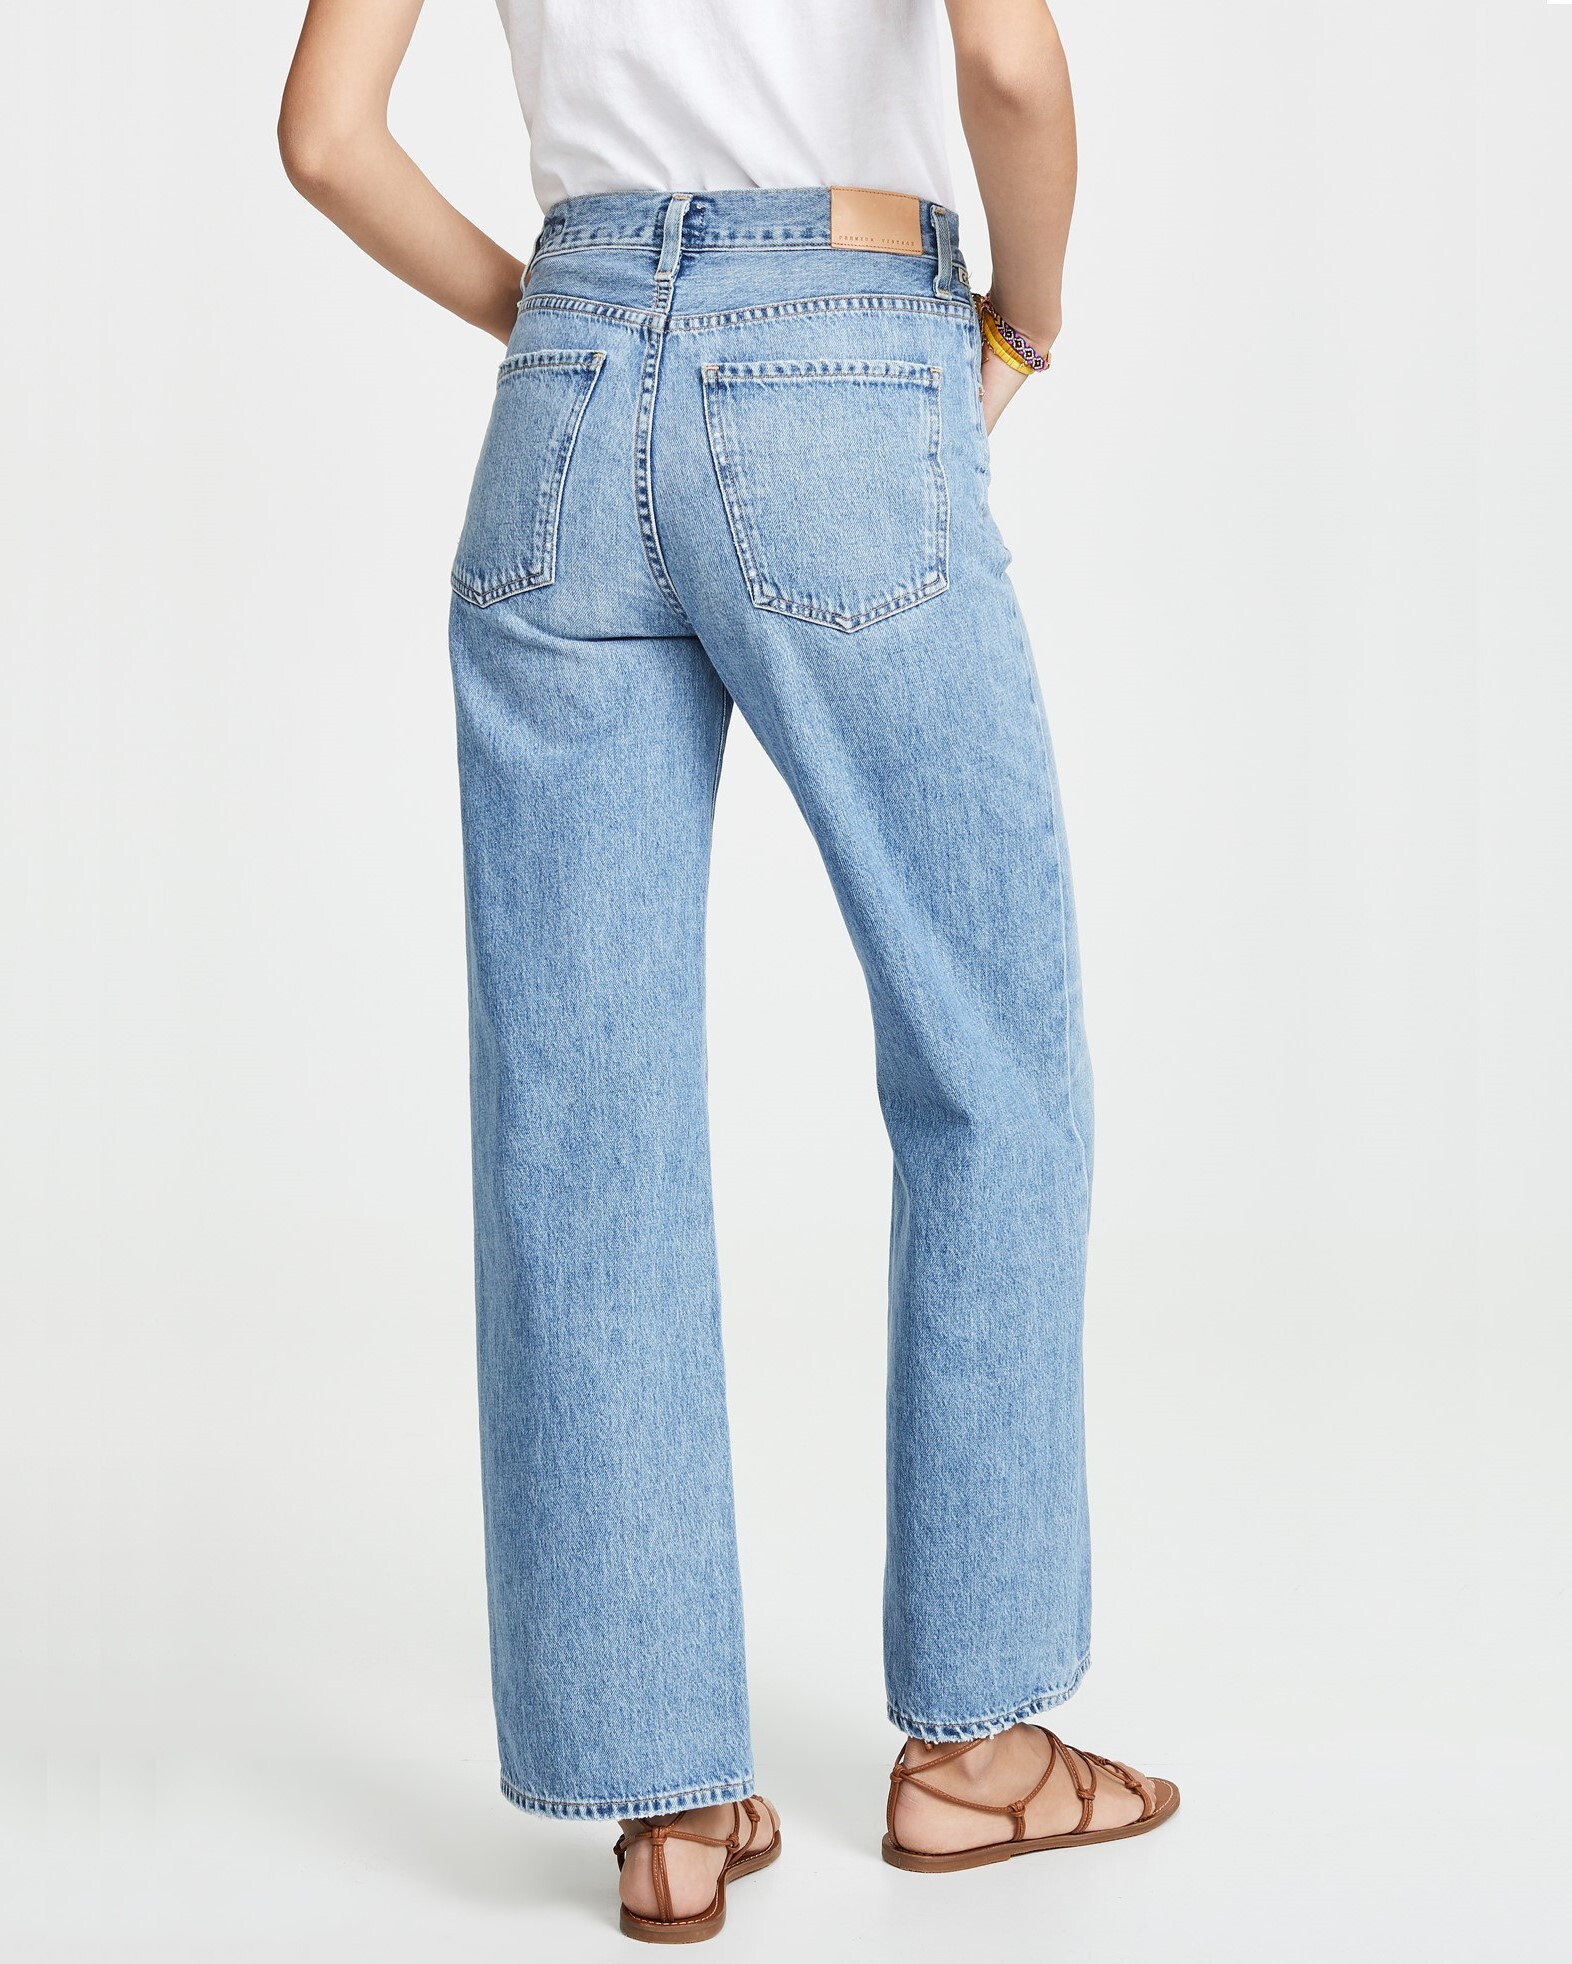 FLAVIE TROUSER JEANS (TULAROSA)- CITIZENS OF HUMANITY SUMMER 21 Boxing ...